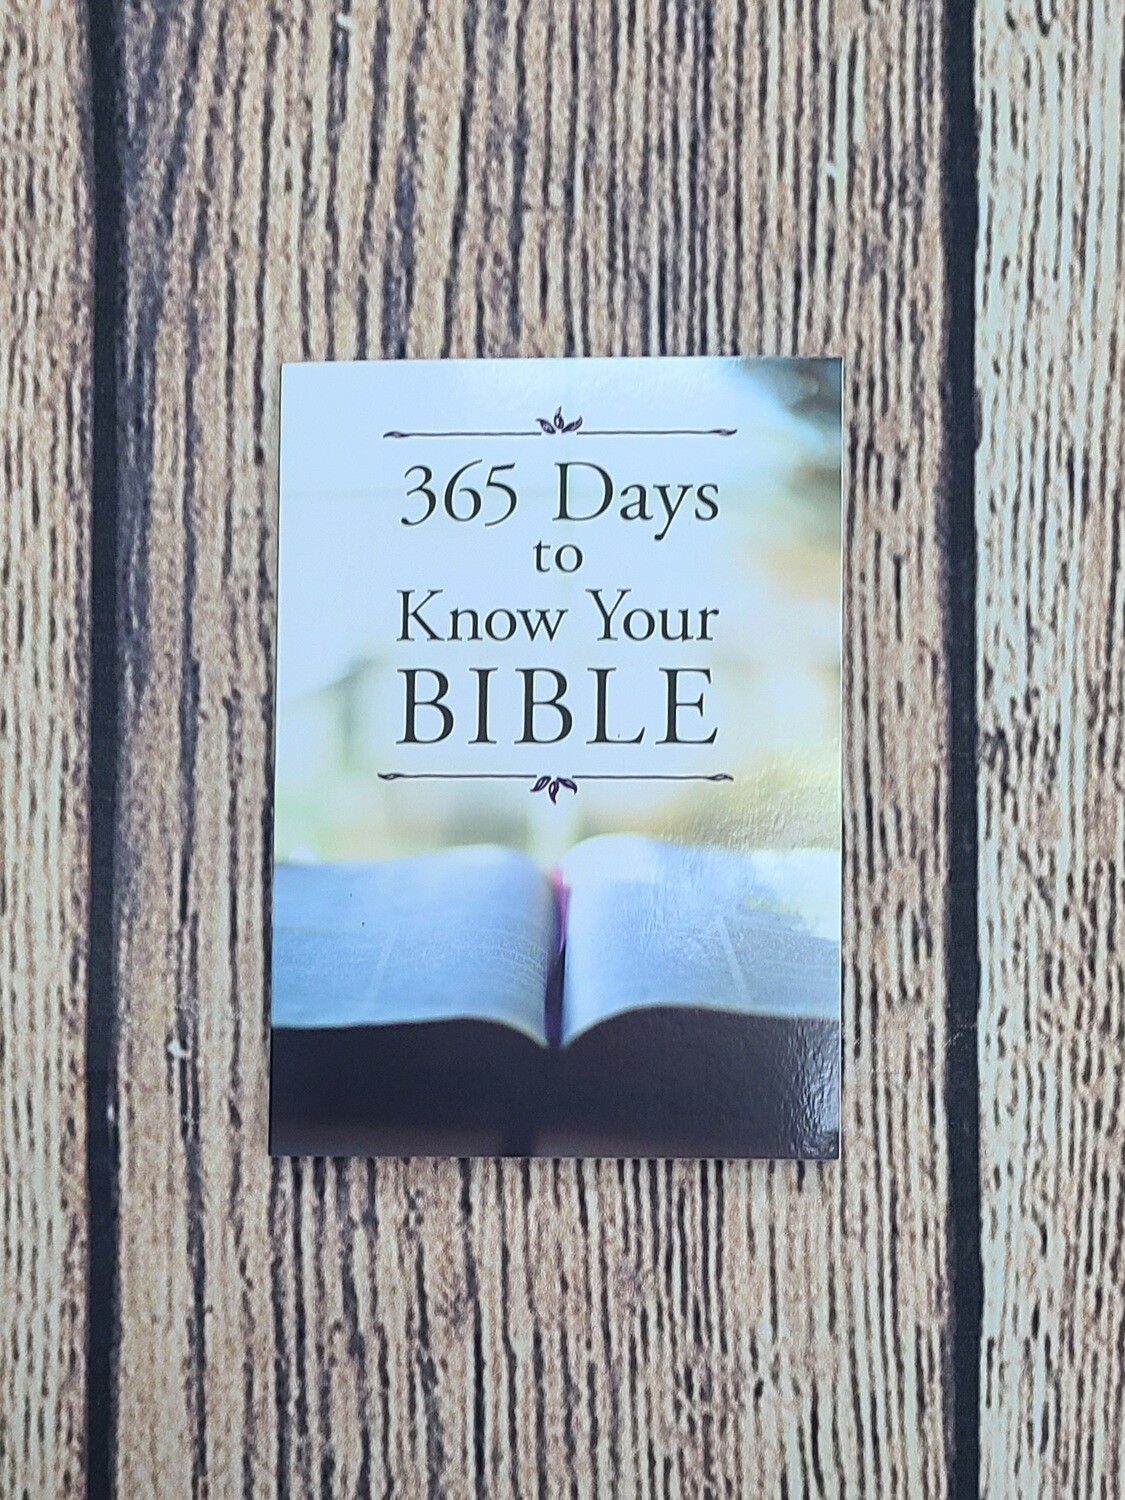 365 Days to Know Your Bible by Paul Kent - Paperback - New